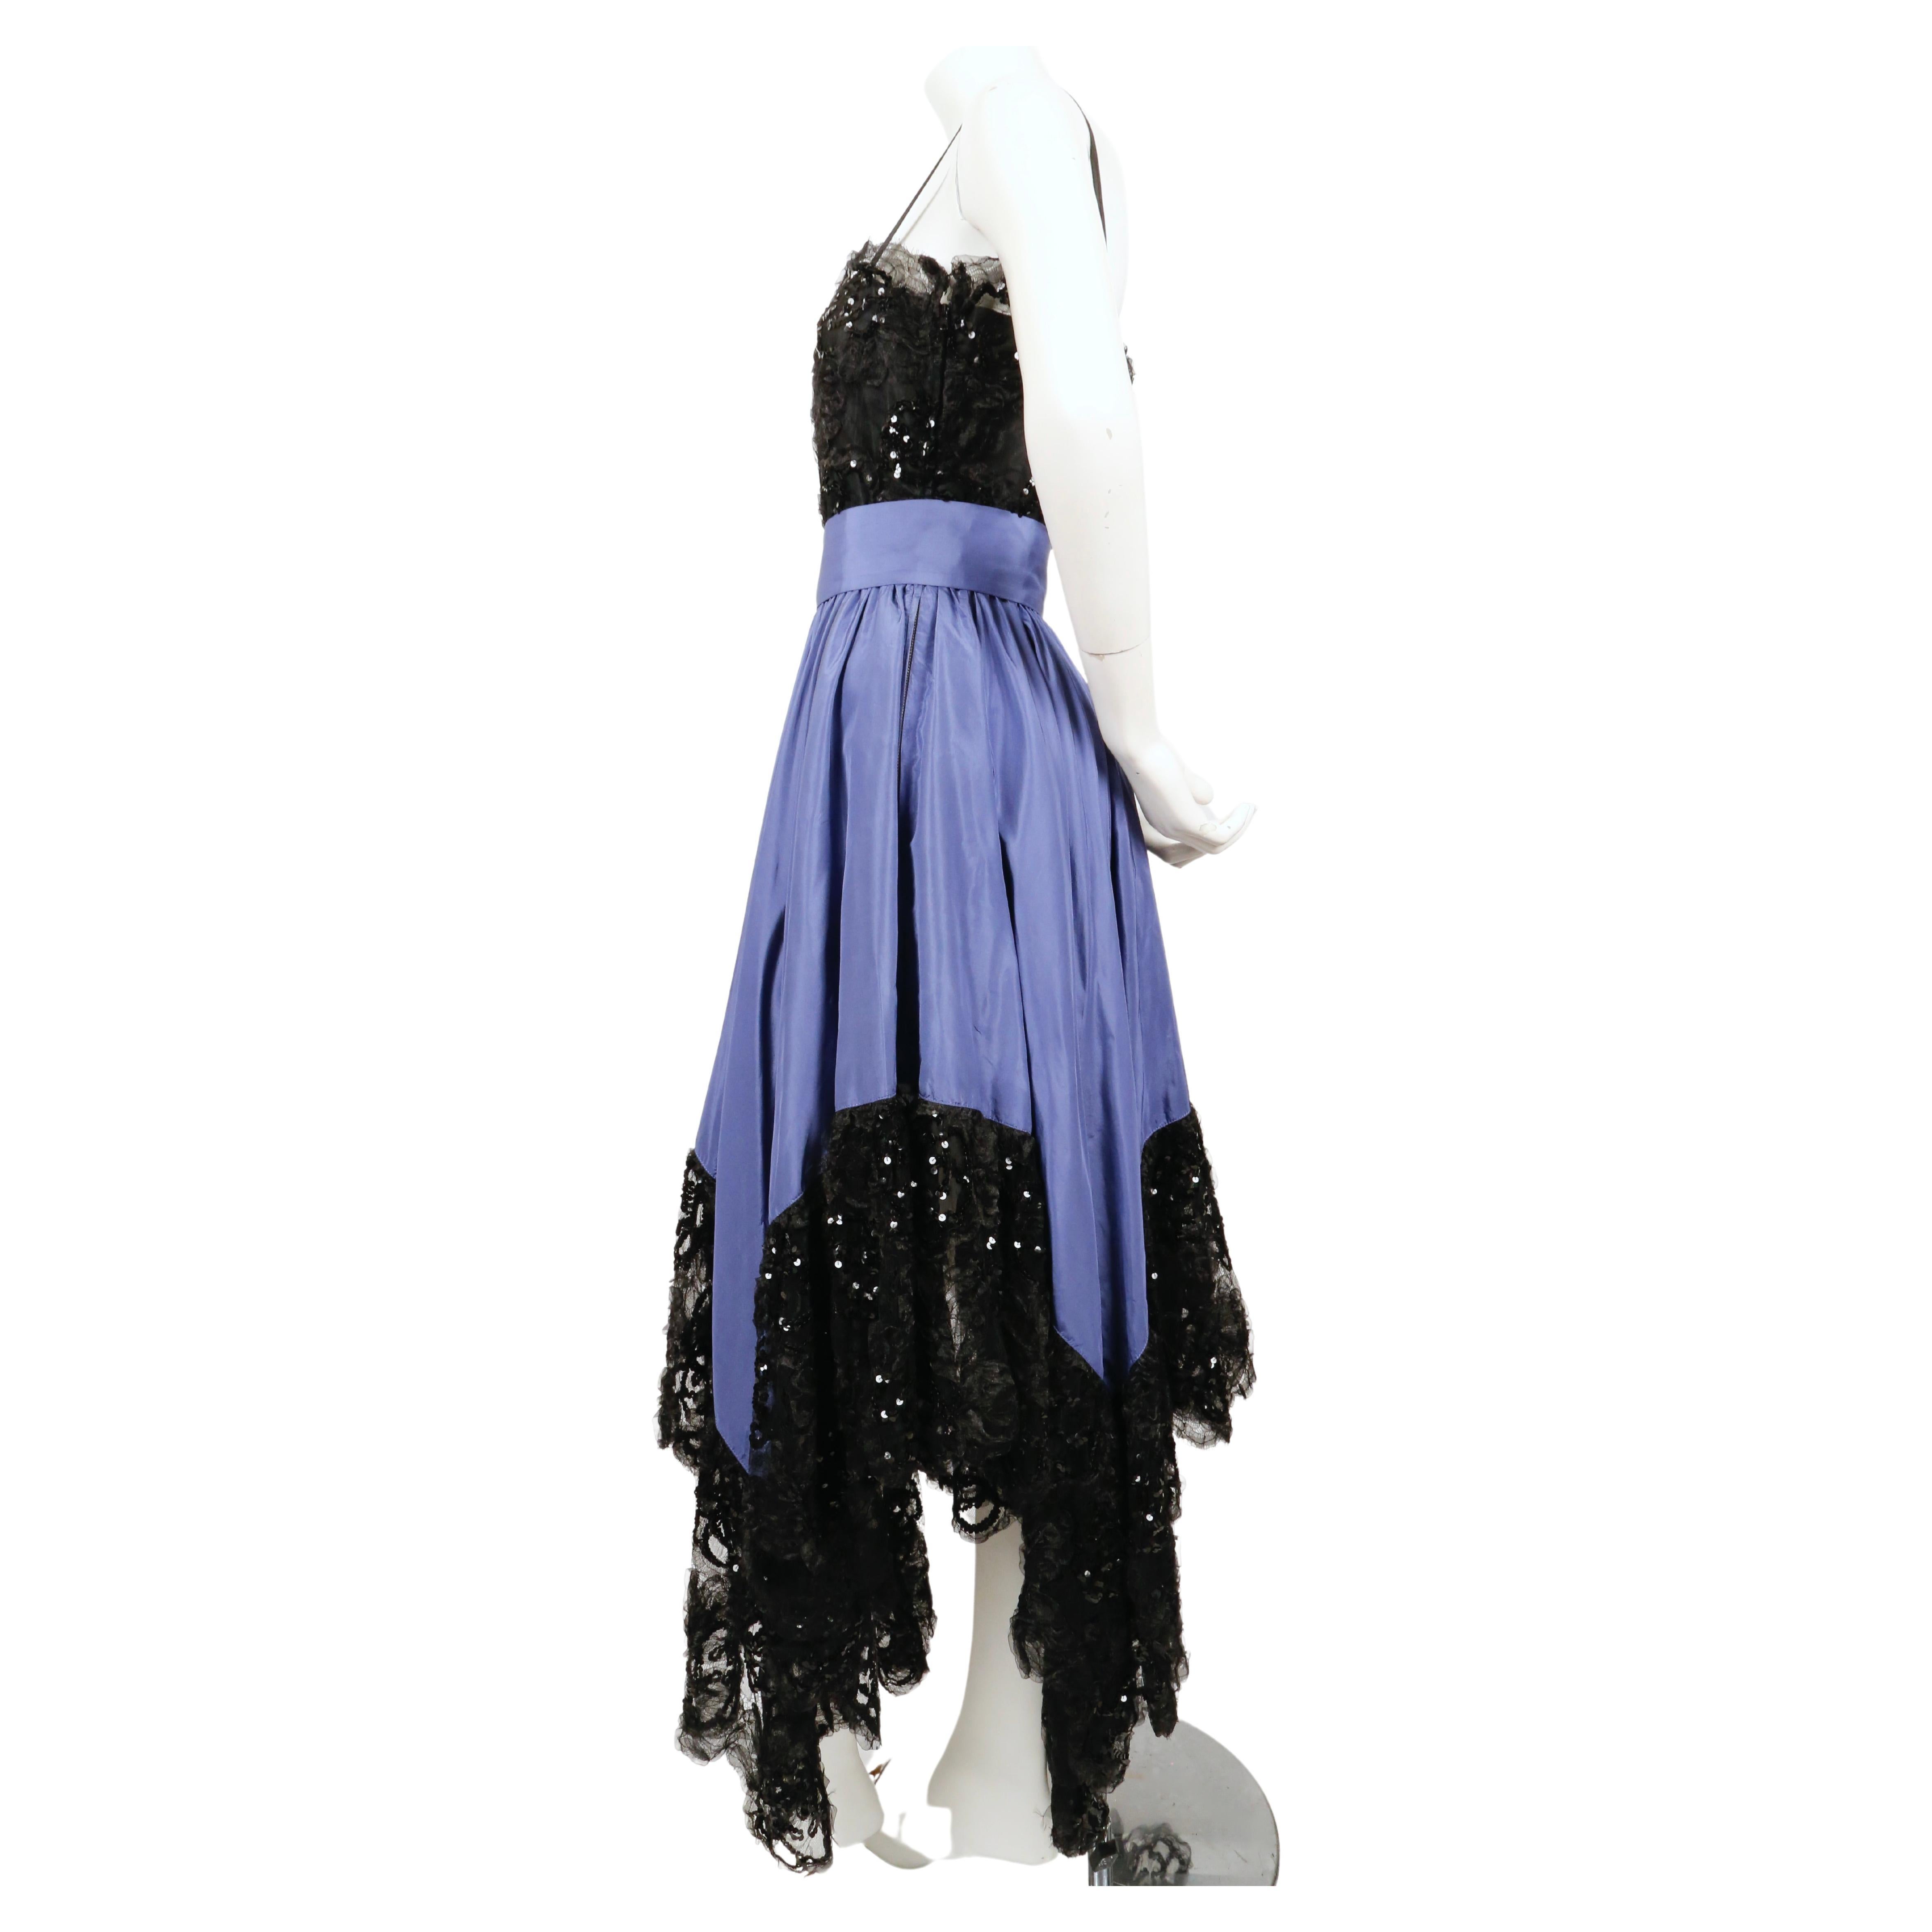 Black lace and periwinkle silk taffeta gown with sequins and handkerchief hemline designed by Yves Saint Laurent dating to fall of 1981 exactly as seen on the runway. Labeled a French size 40 however this fits small. Approximate measurements: bust